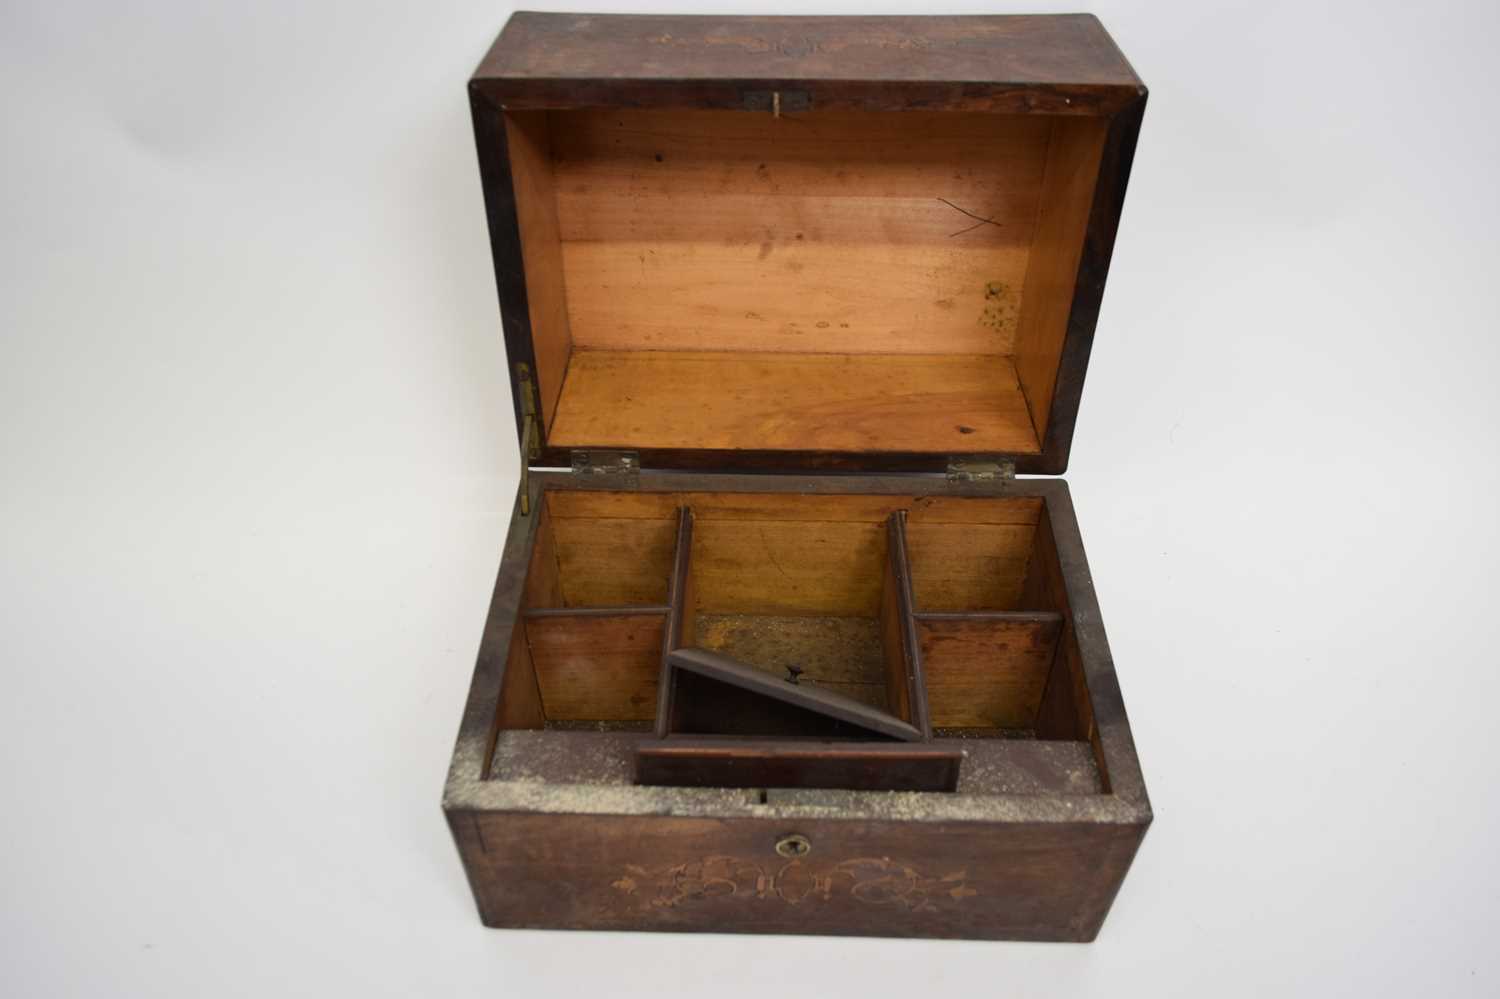 Continental wooden jewellery box with inlaid designs